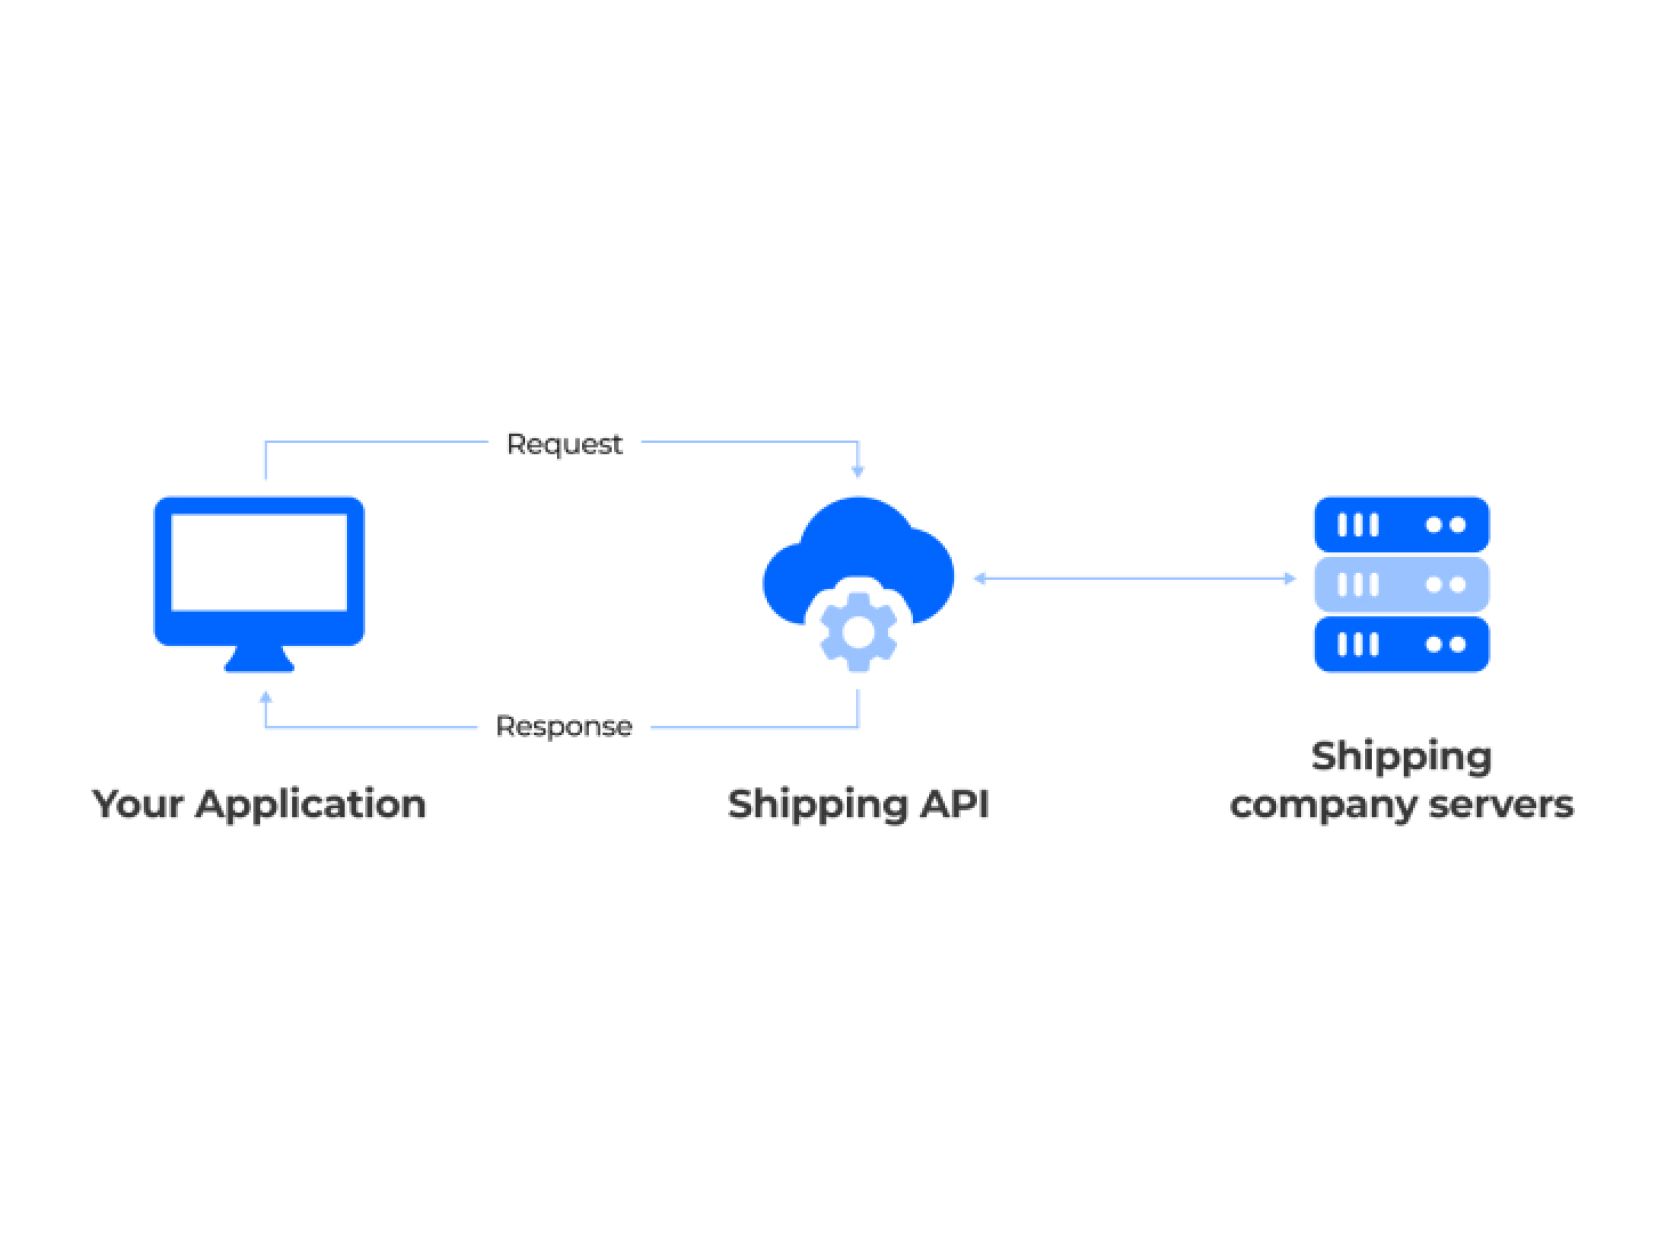 What Is Shipping API?